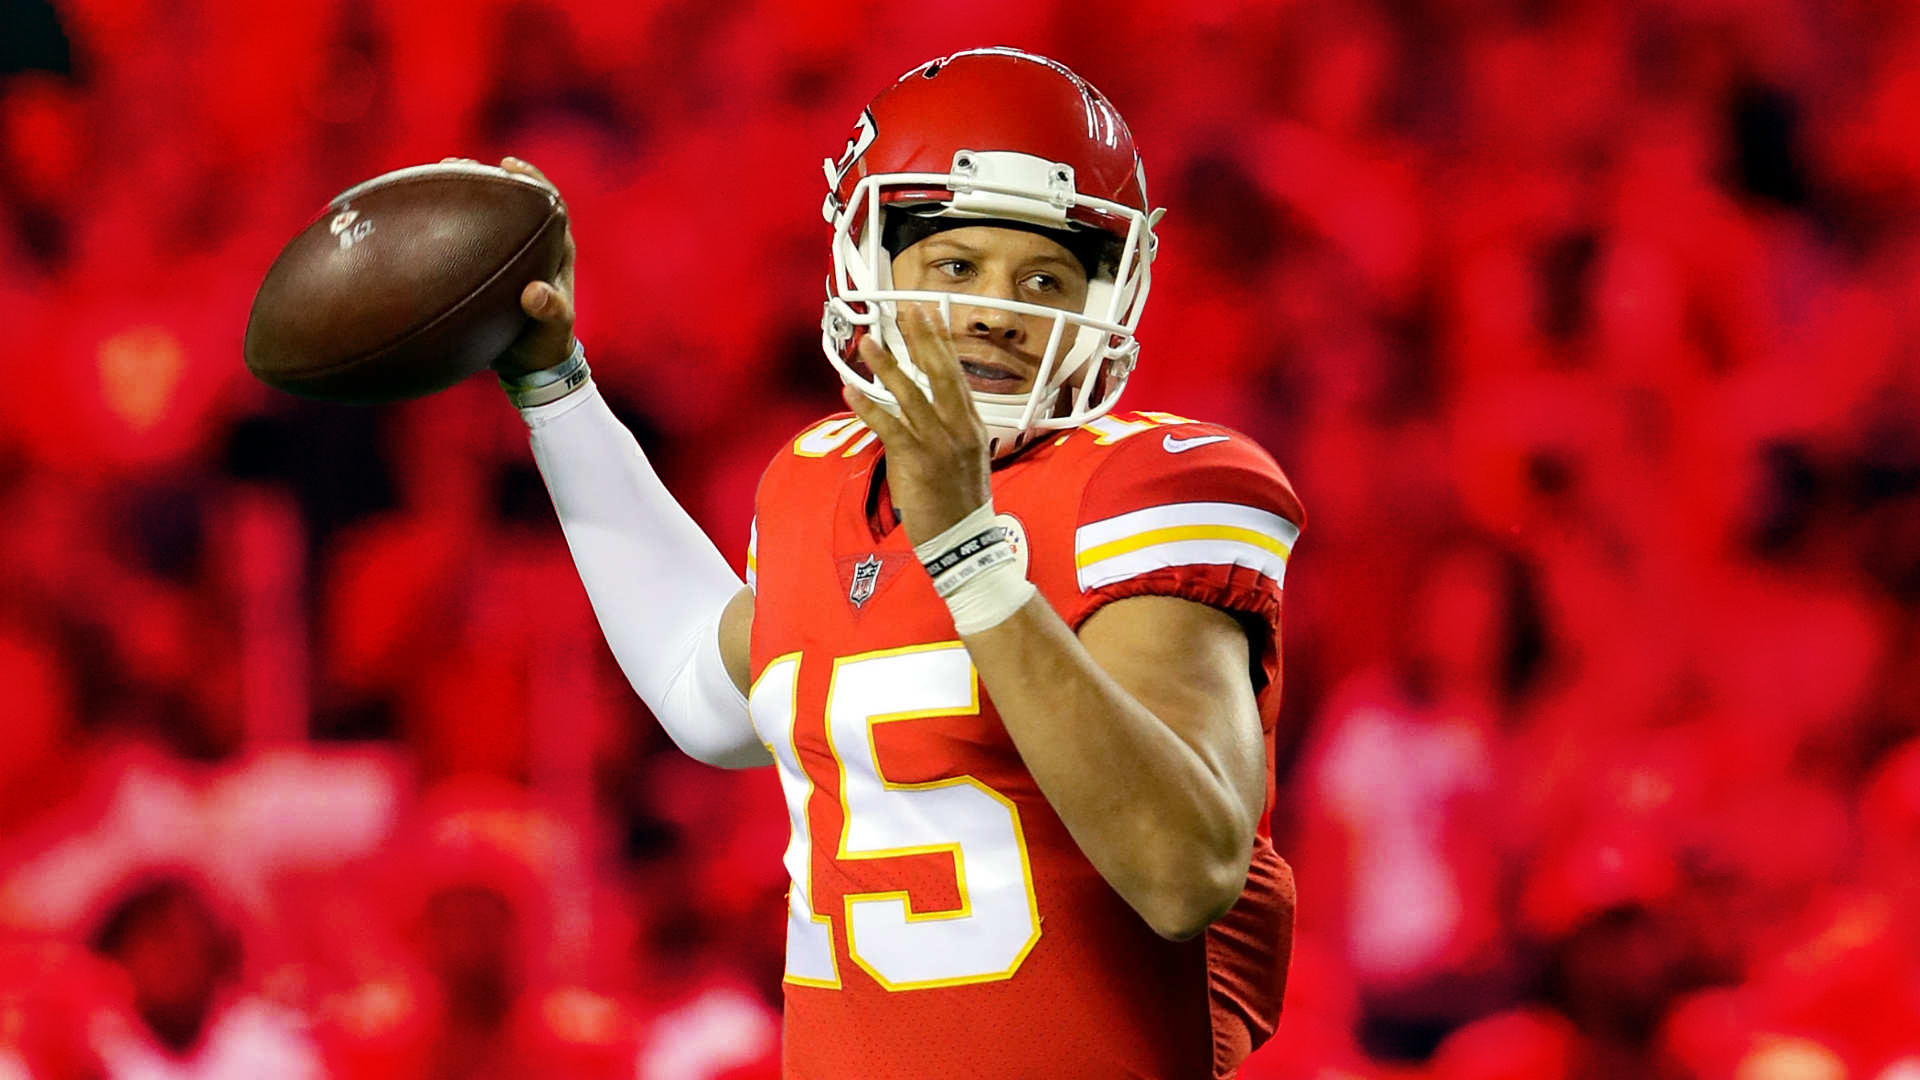 Calm down, football fans: Patrick Mahomes looks good, but we've